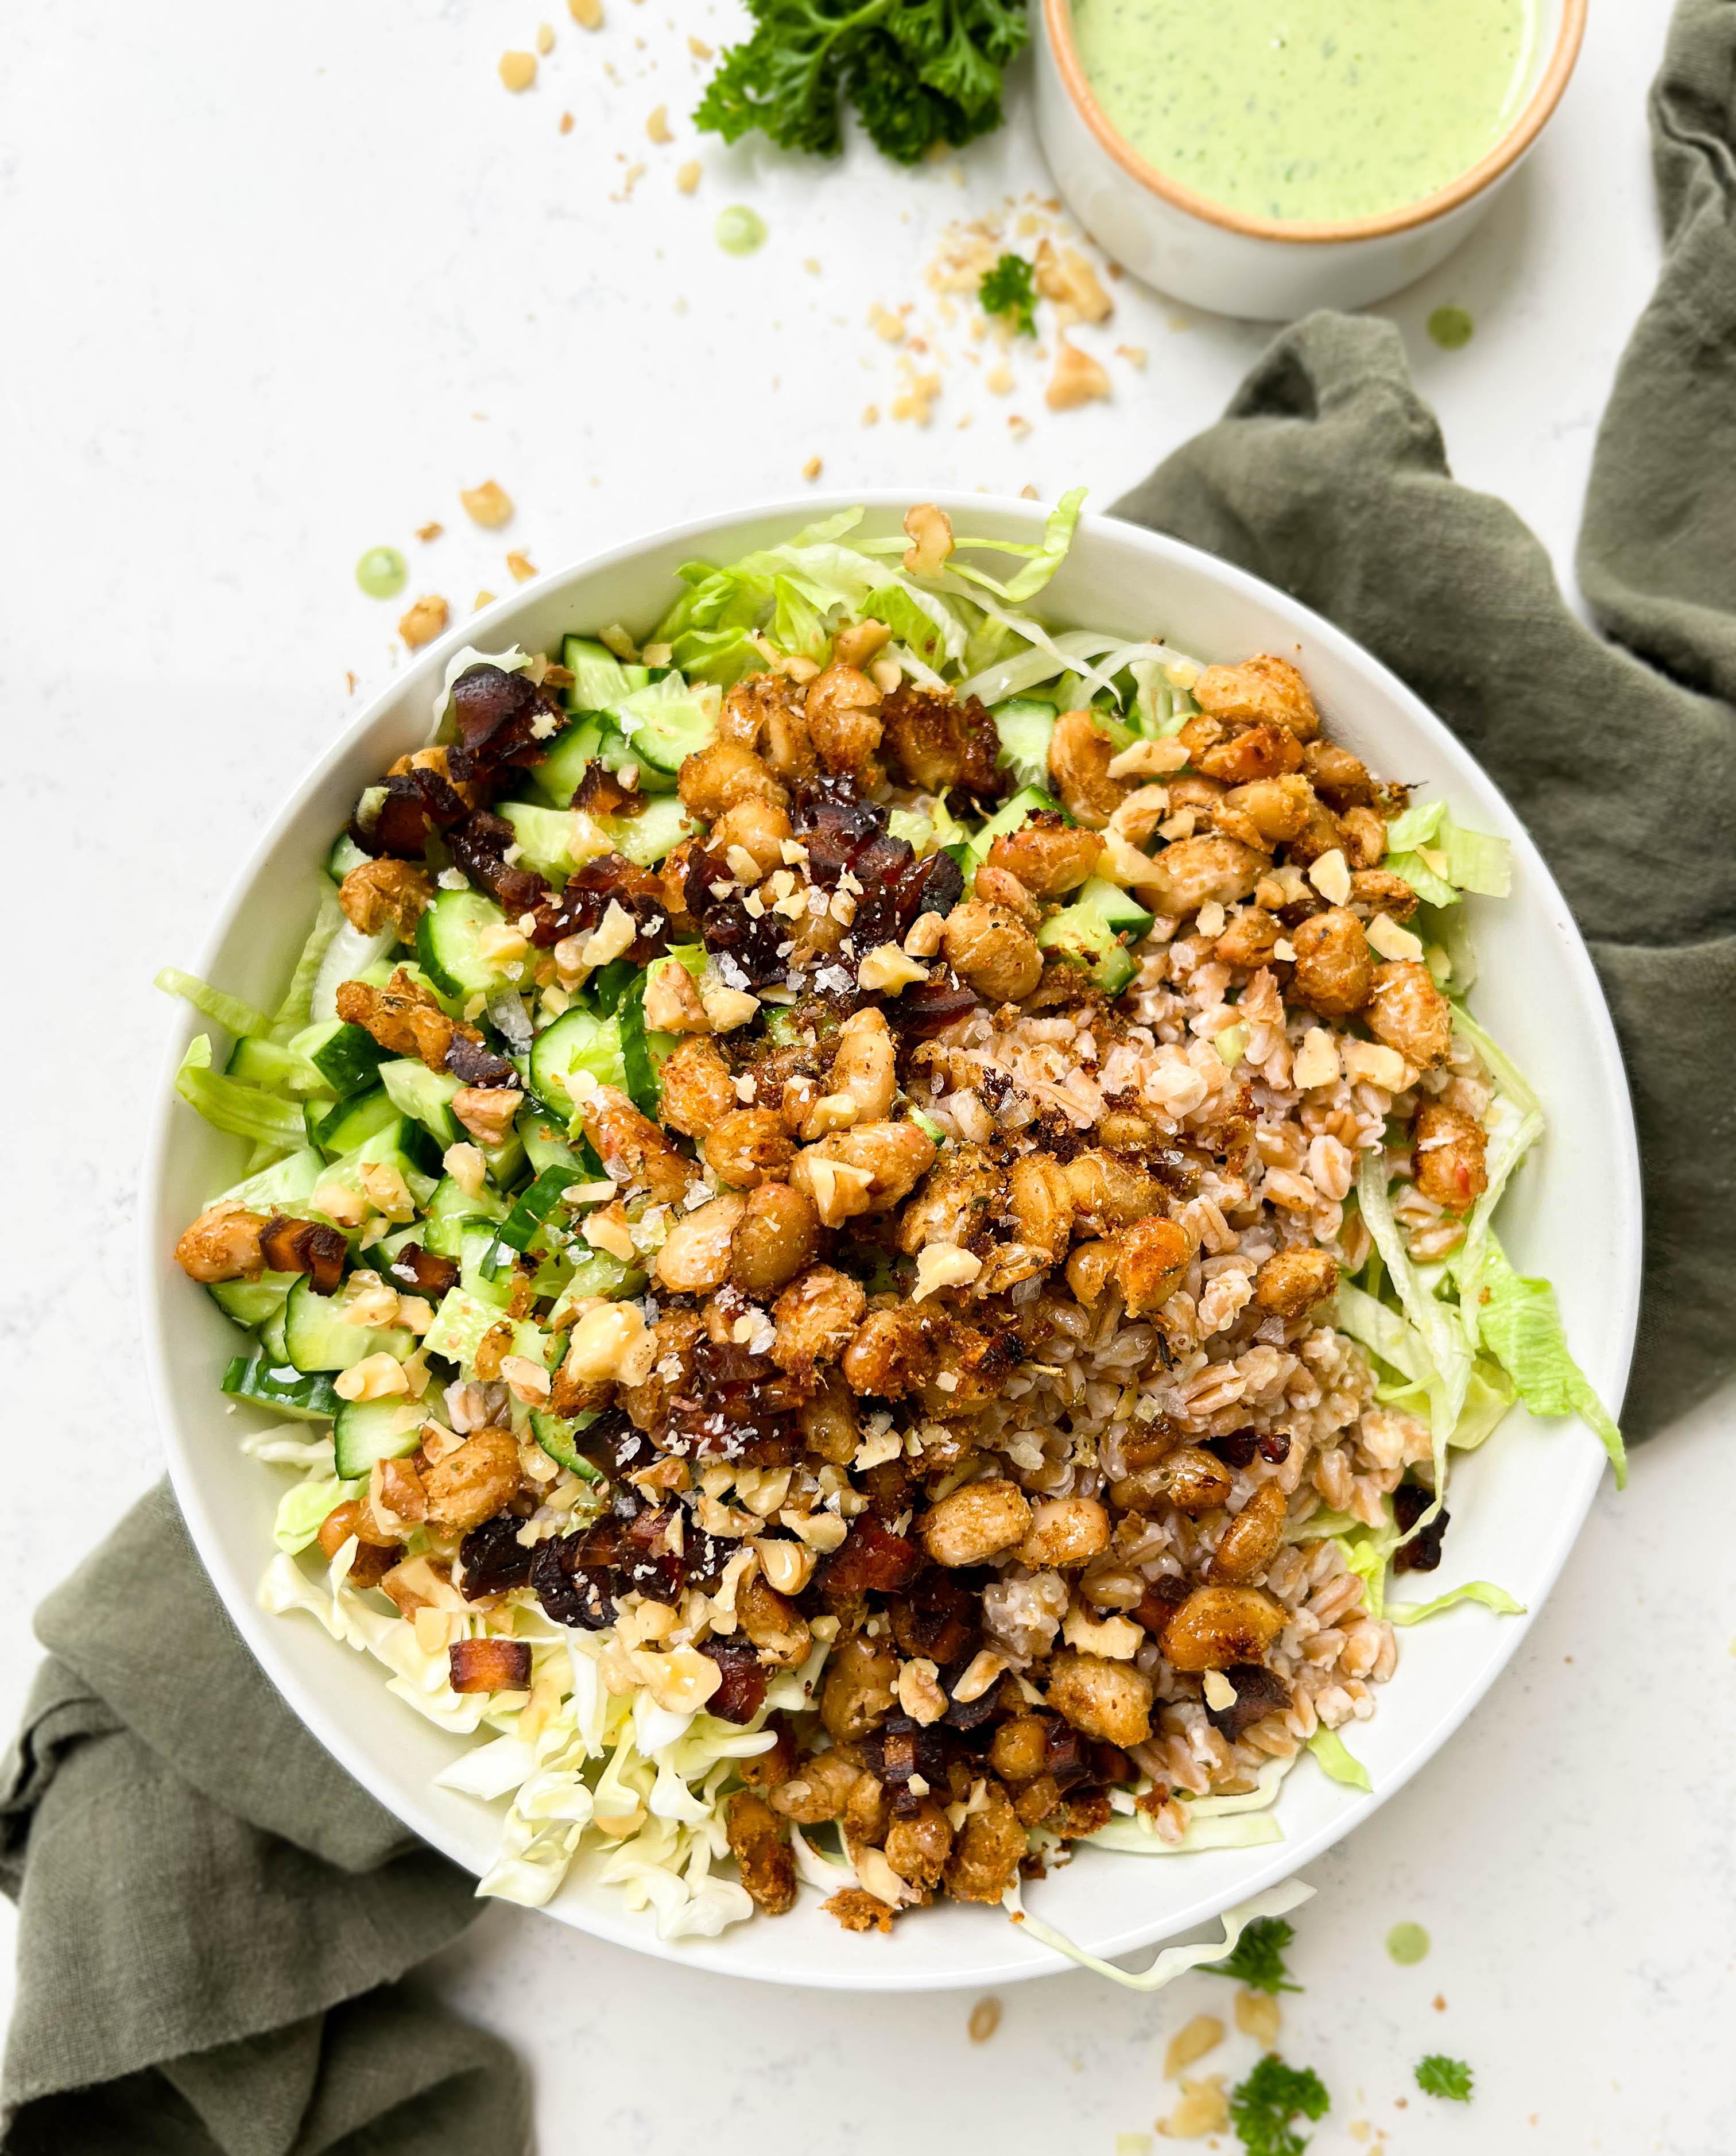 crunchy green cabbage salad with beans and farro next to parsley tahini dressing